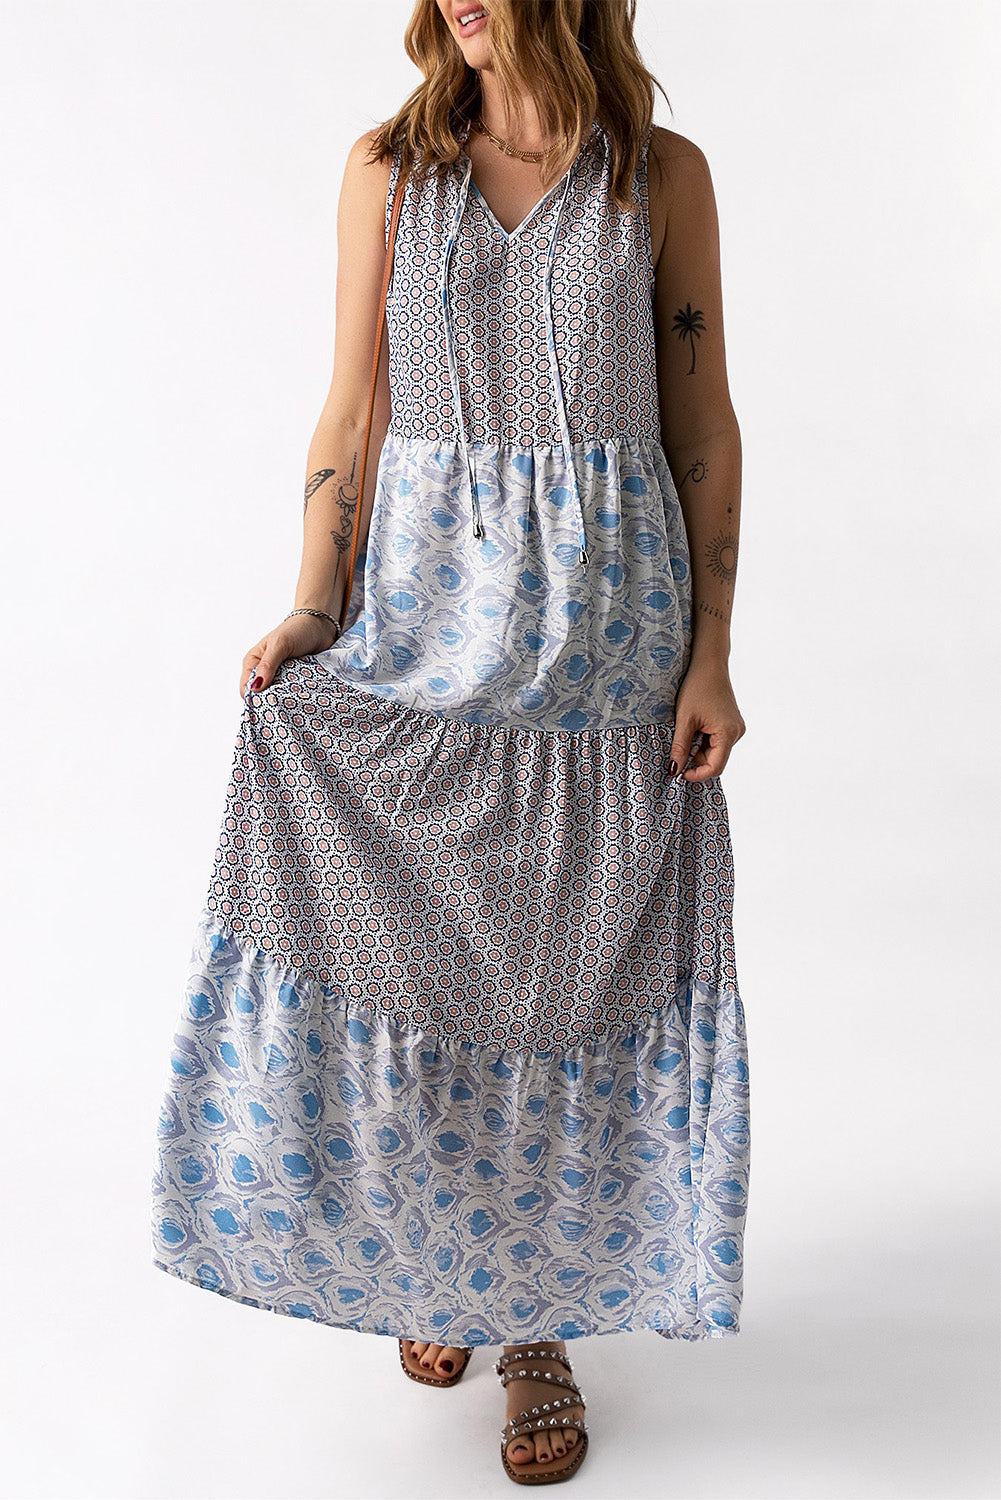 In The Mix Maxi Dress